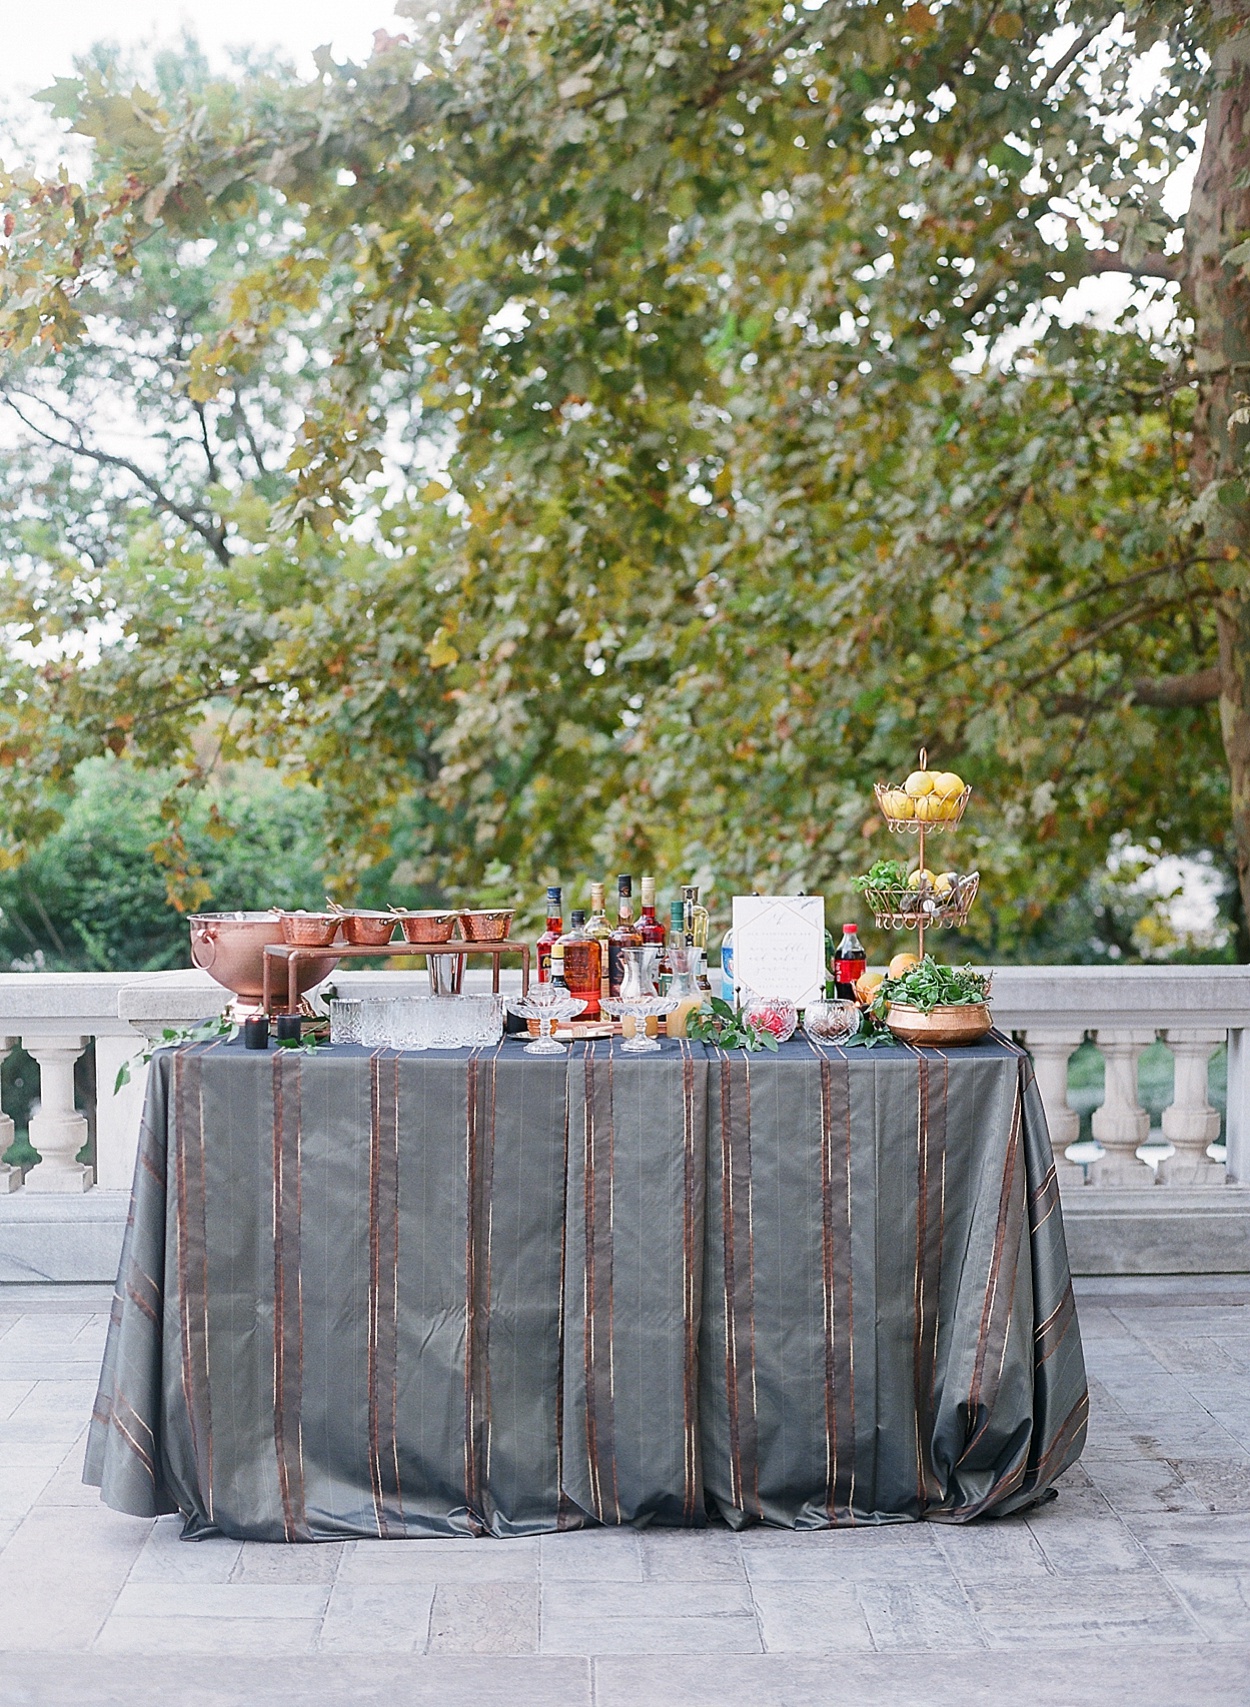 Himalayan salt, copper & marble wedding at DC's DAR | photograph by Abby Grace